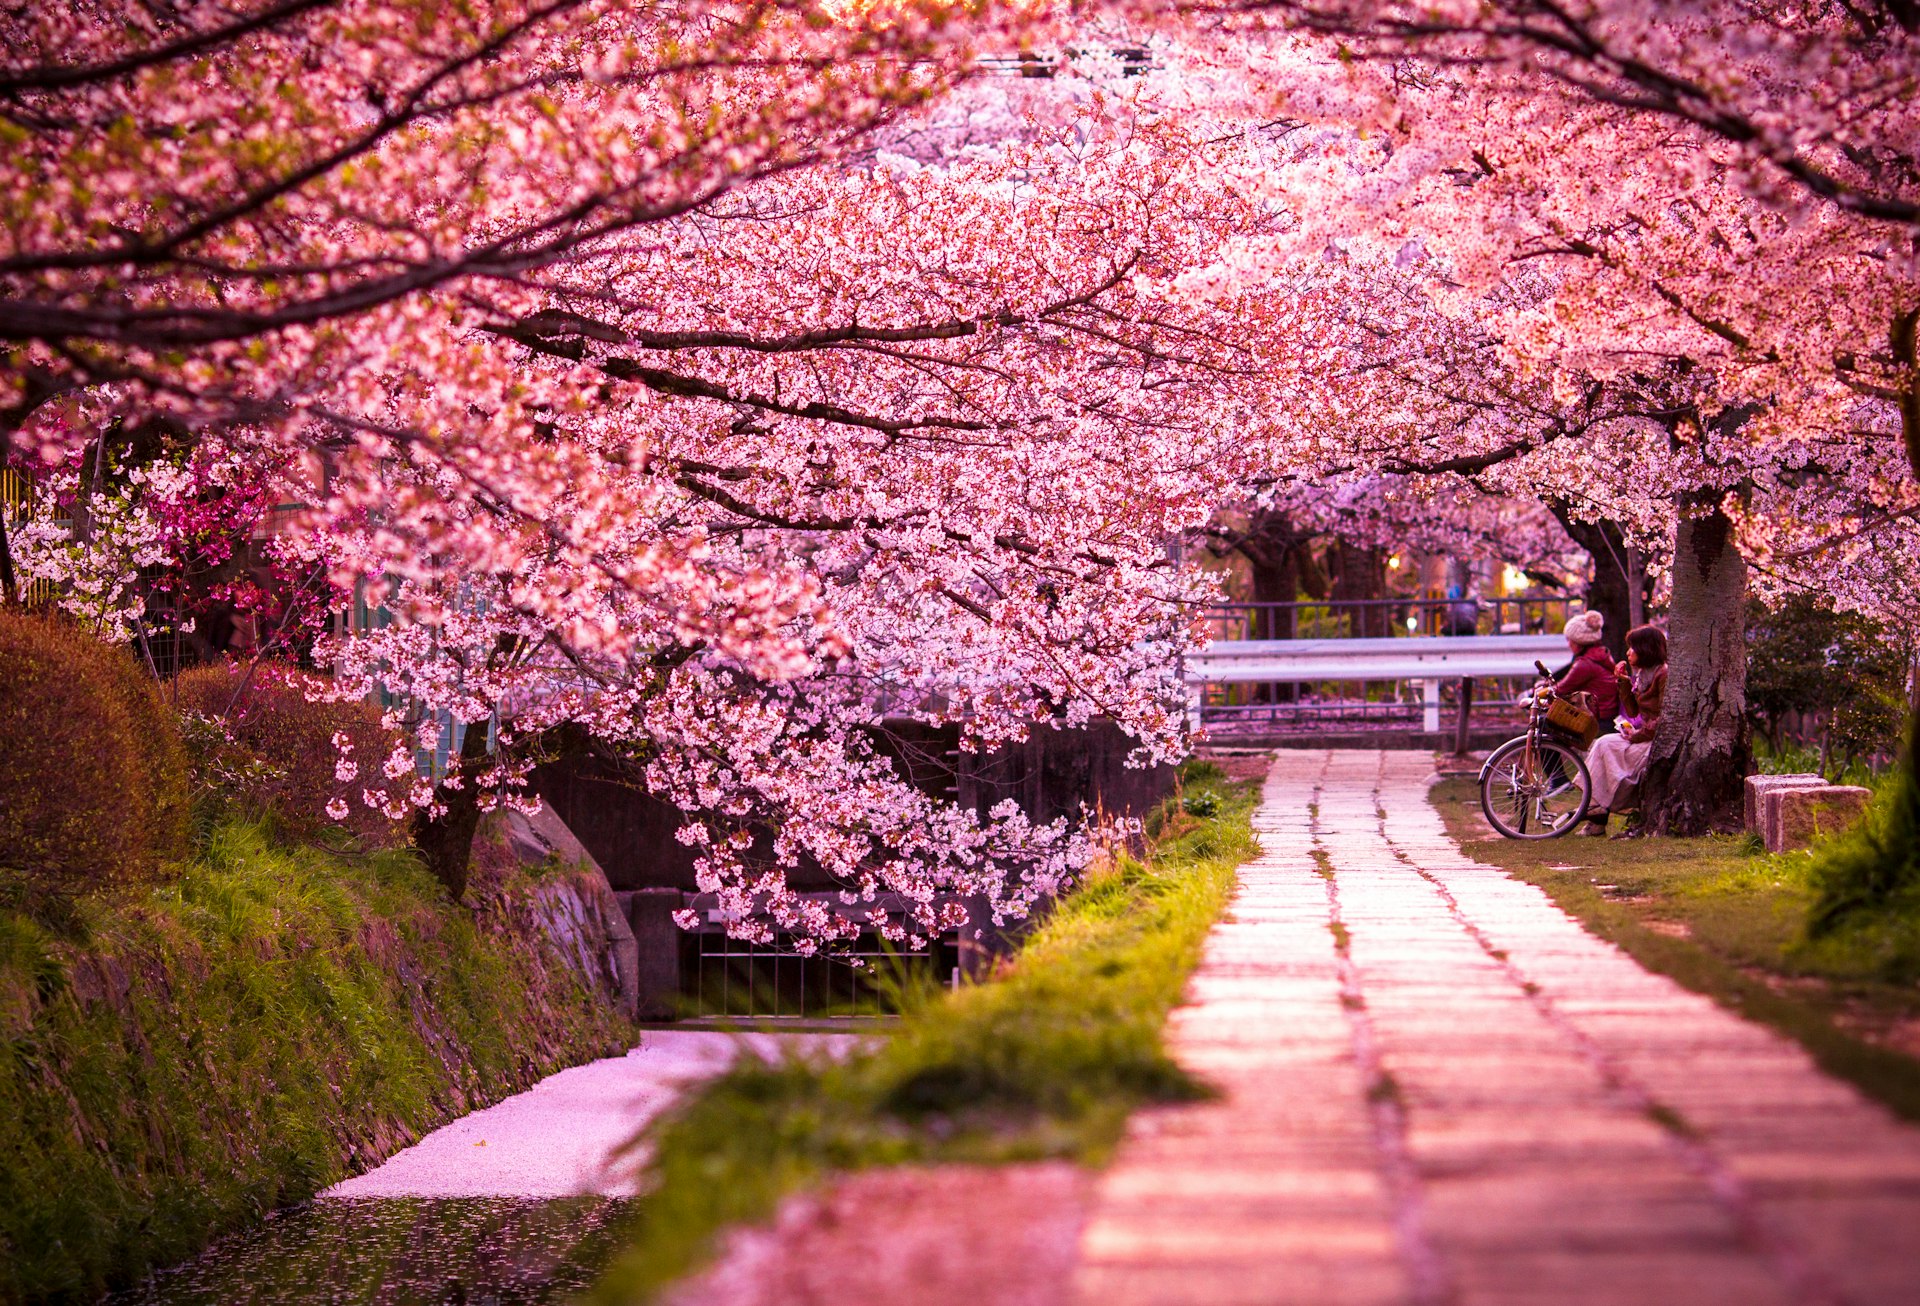 Pathway lined with pink cherry blossom. People sit on a bench admiring the bloom